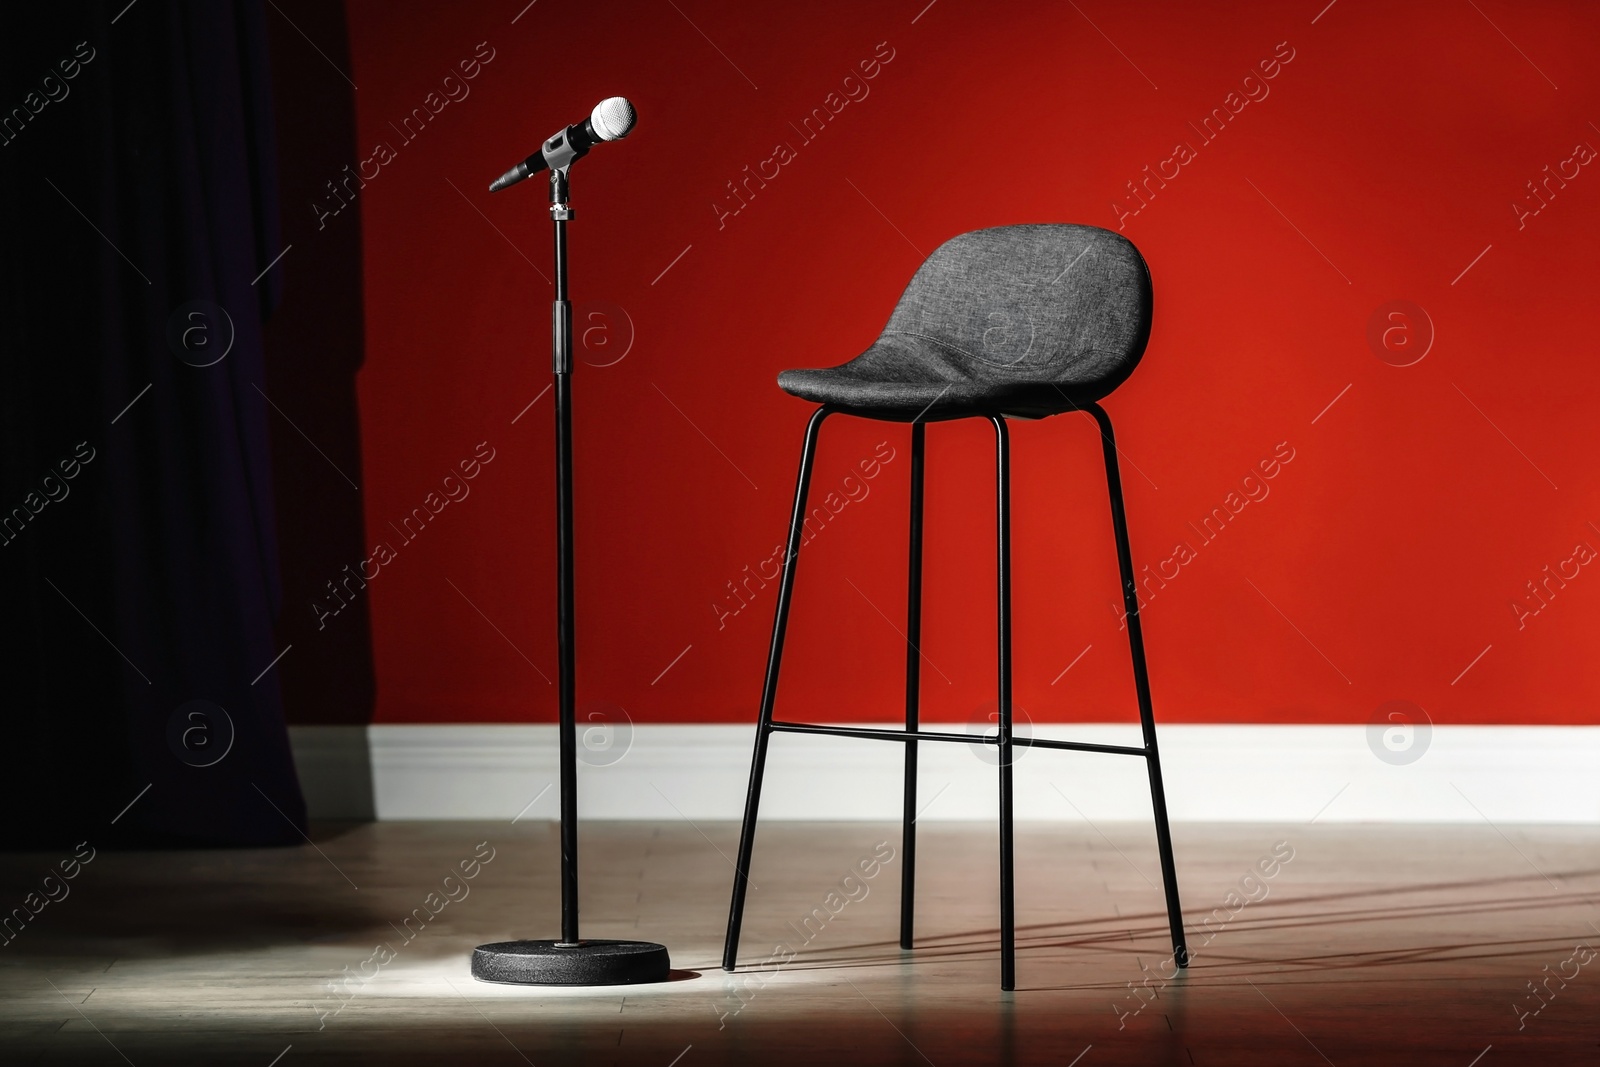 Photo of Microphone and stool on stage against color wall